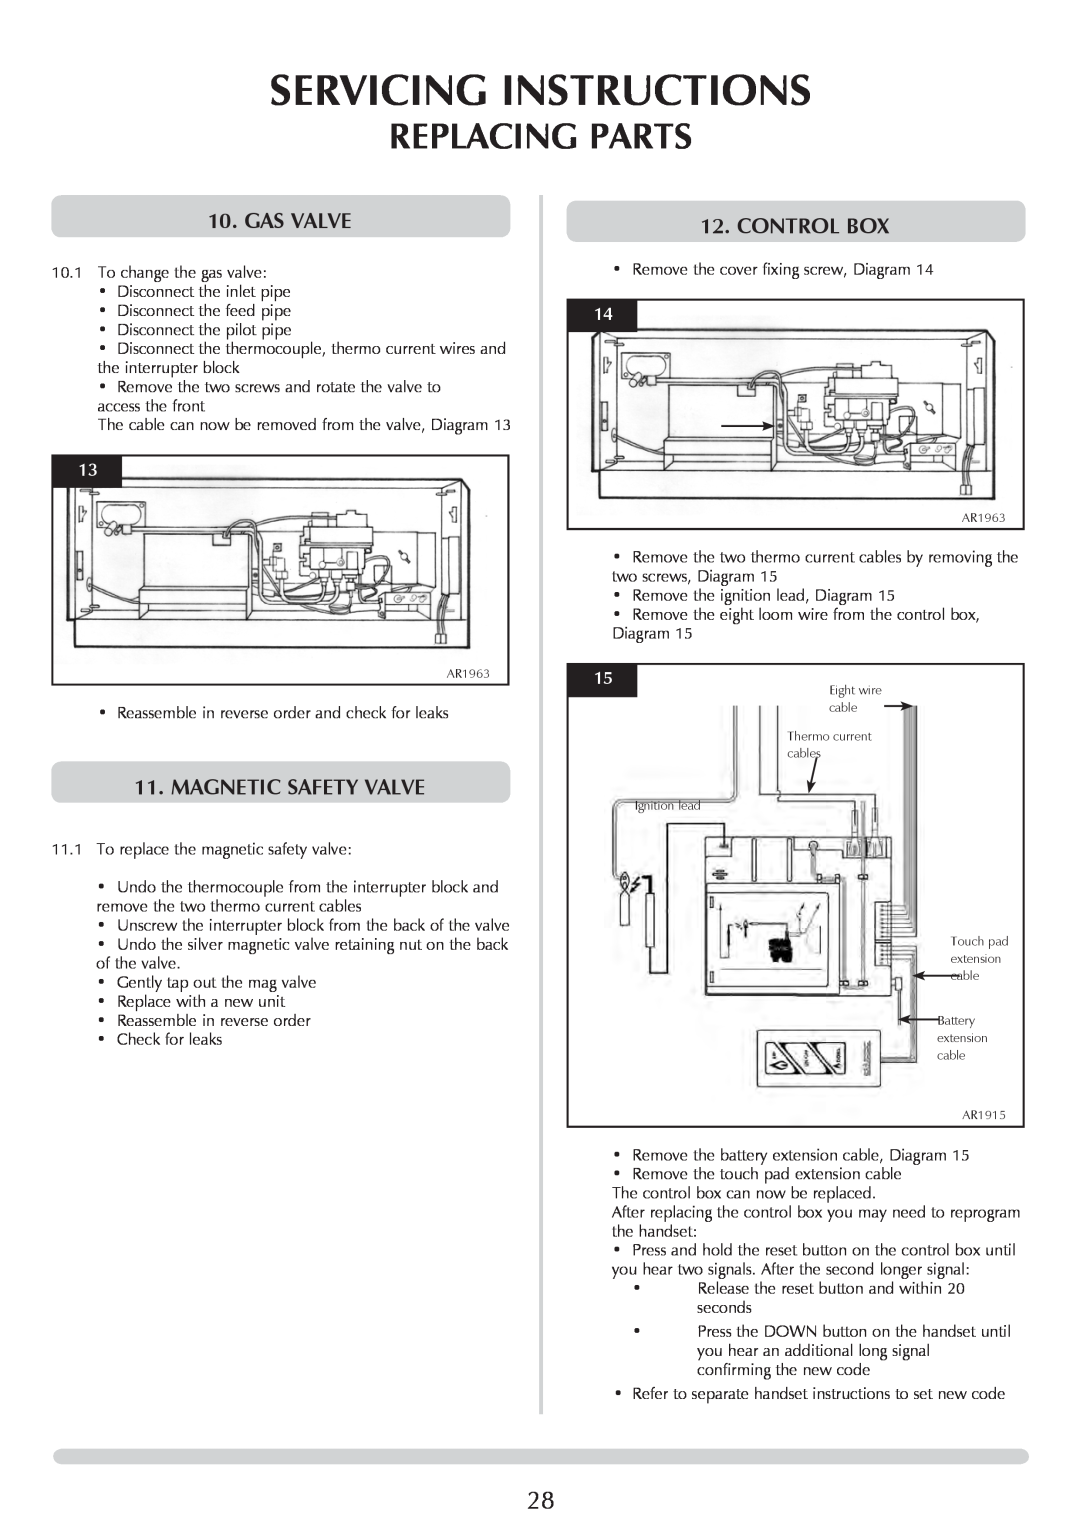 Stovax 8700CFCHEC, P8701CFCHEC manual Servicing Instructions, Replacing Parts, Gas Valve, magnetic safety valve, Control Box 